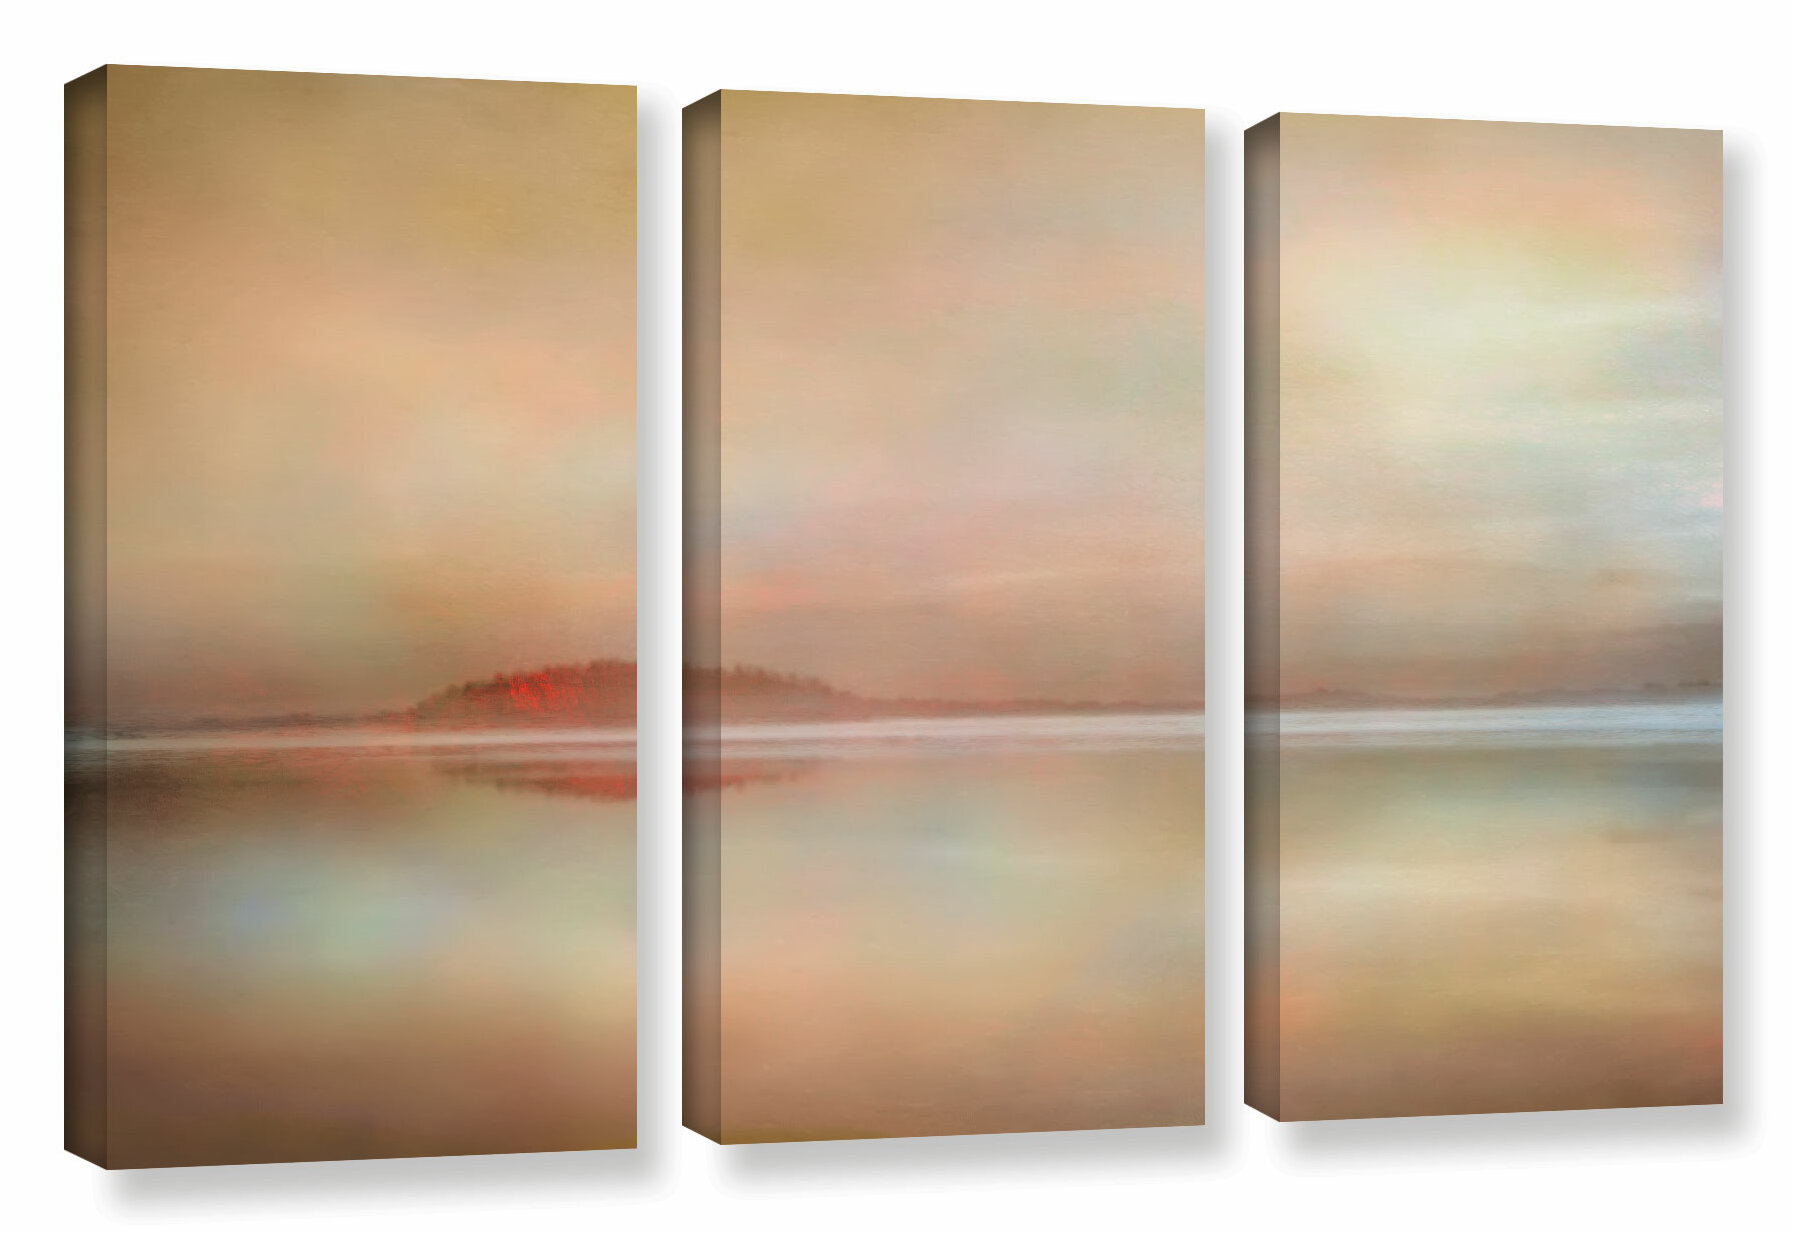 36 by 54 ArtWall Linda Parkers Kyotos Golden Pavilion 3 Piece Gallery-Wrapped Canvas Artwork 